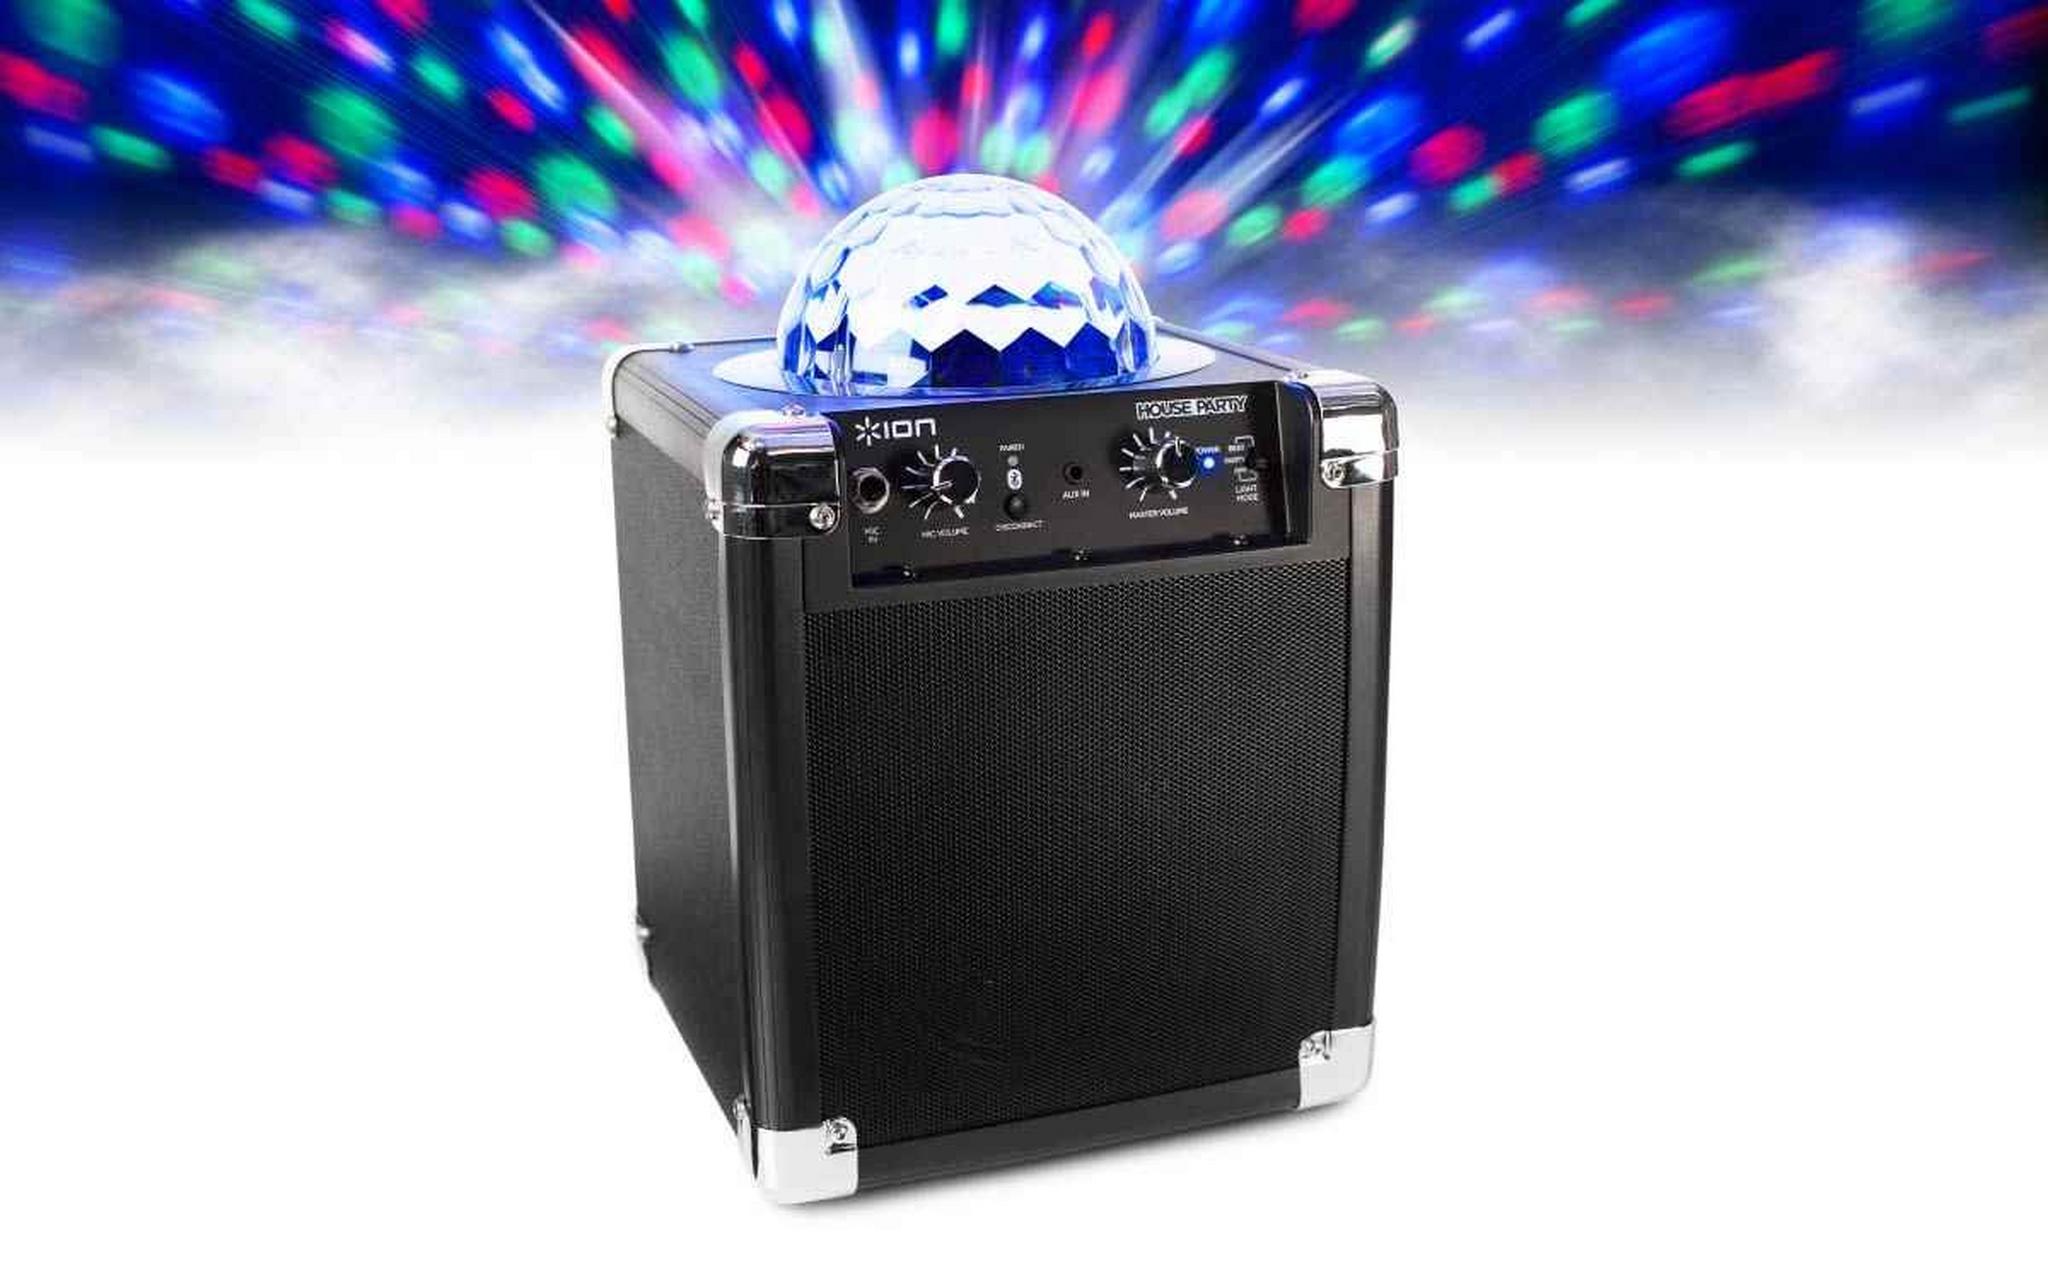 Ion House Party Portable Bluetooth Speaker with Party Lights - Black